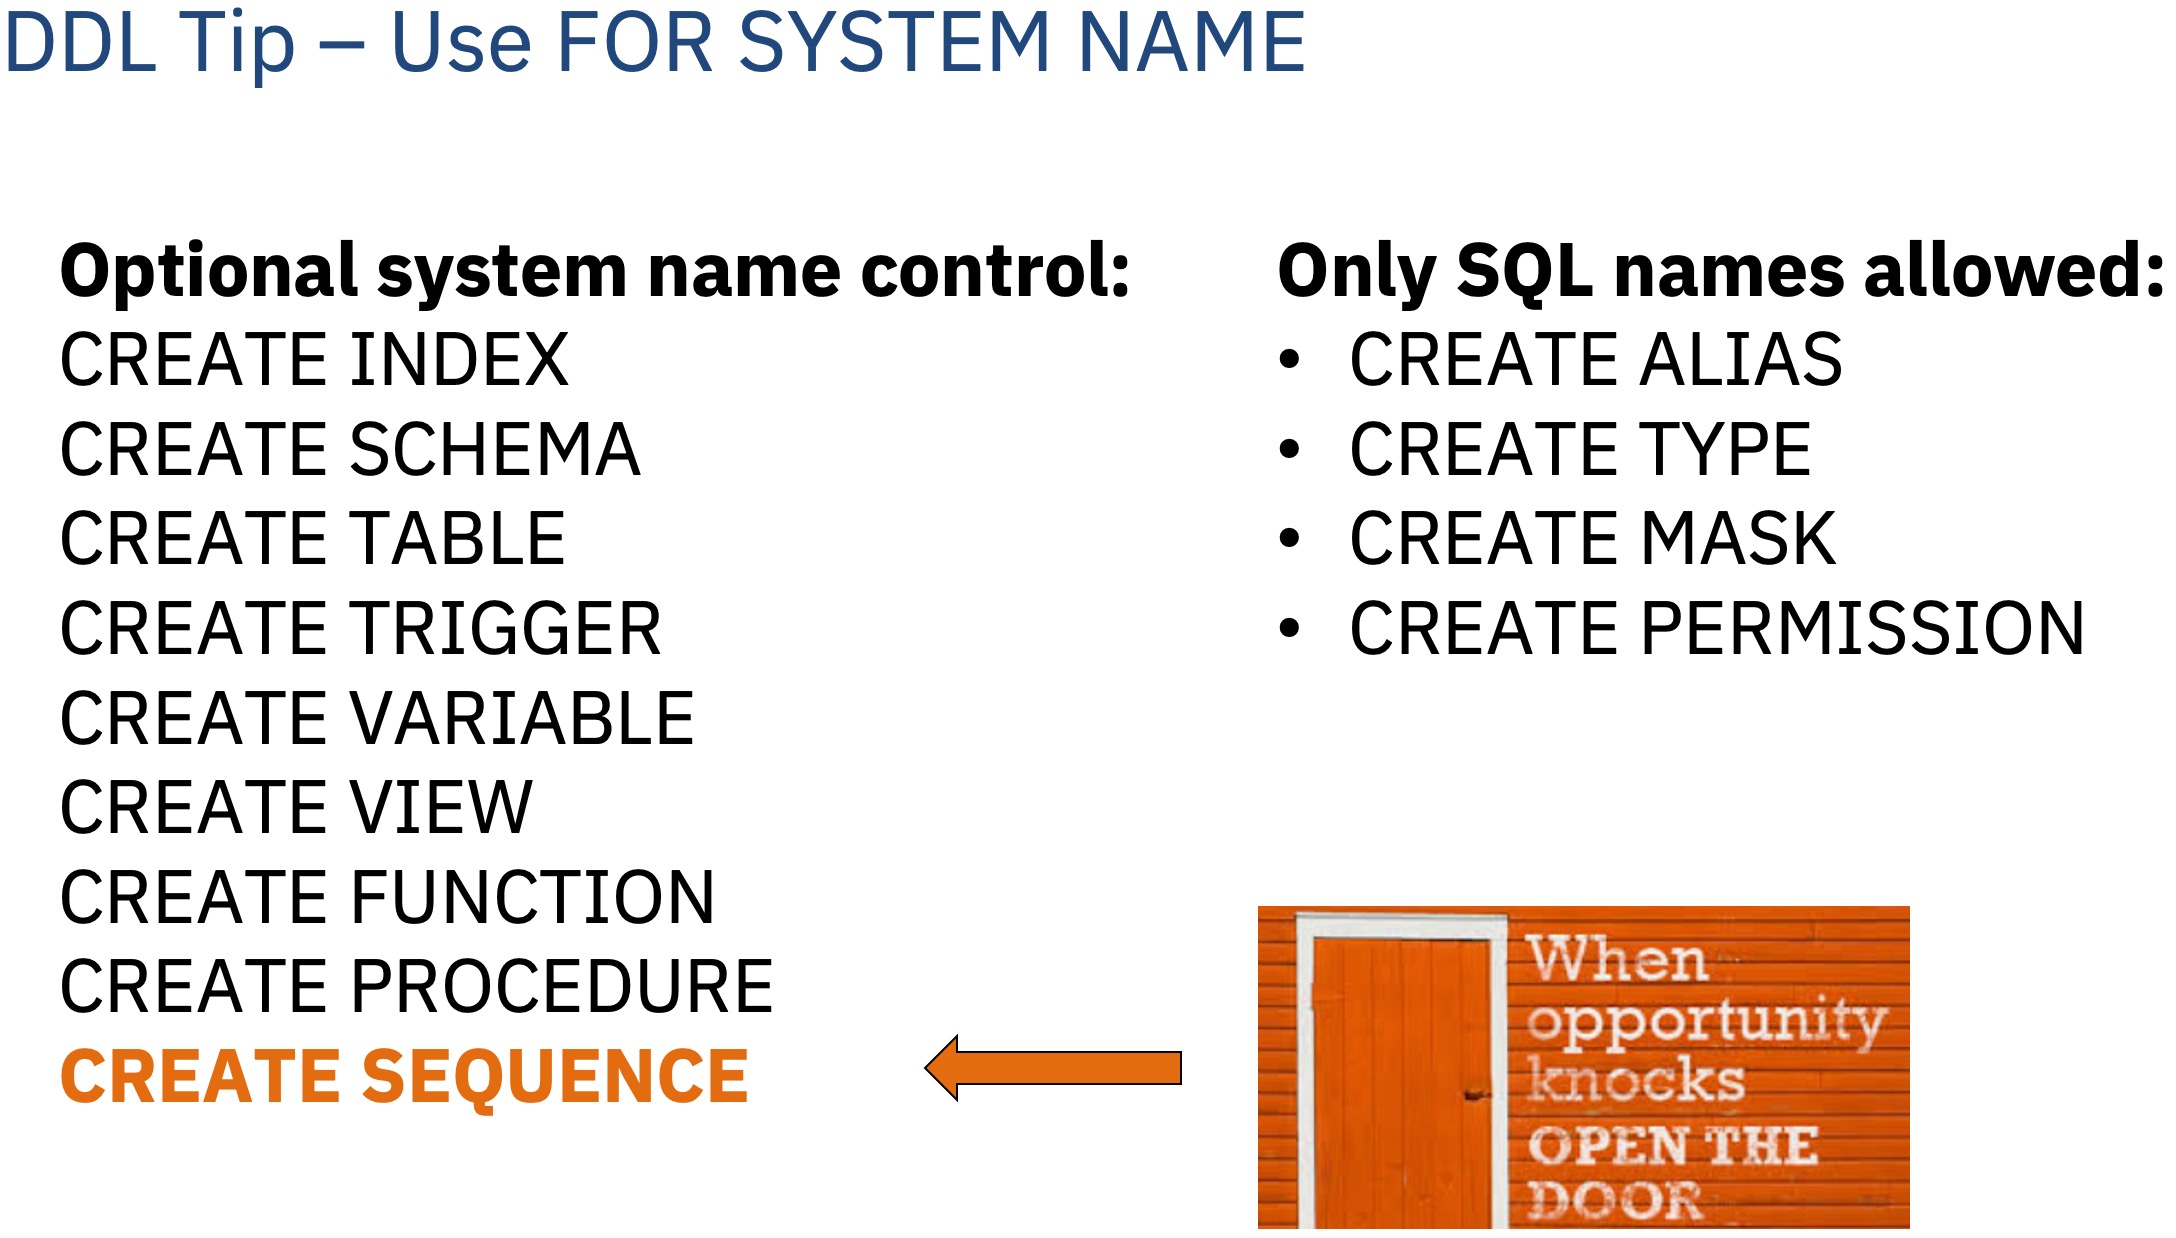 FOR SYSTEM NAME on CREATE SEQUENCE